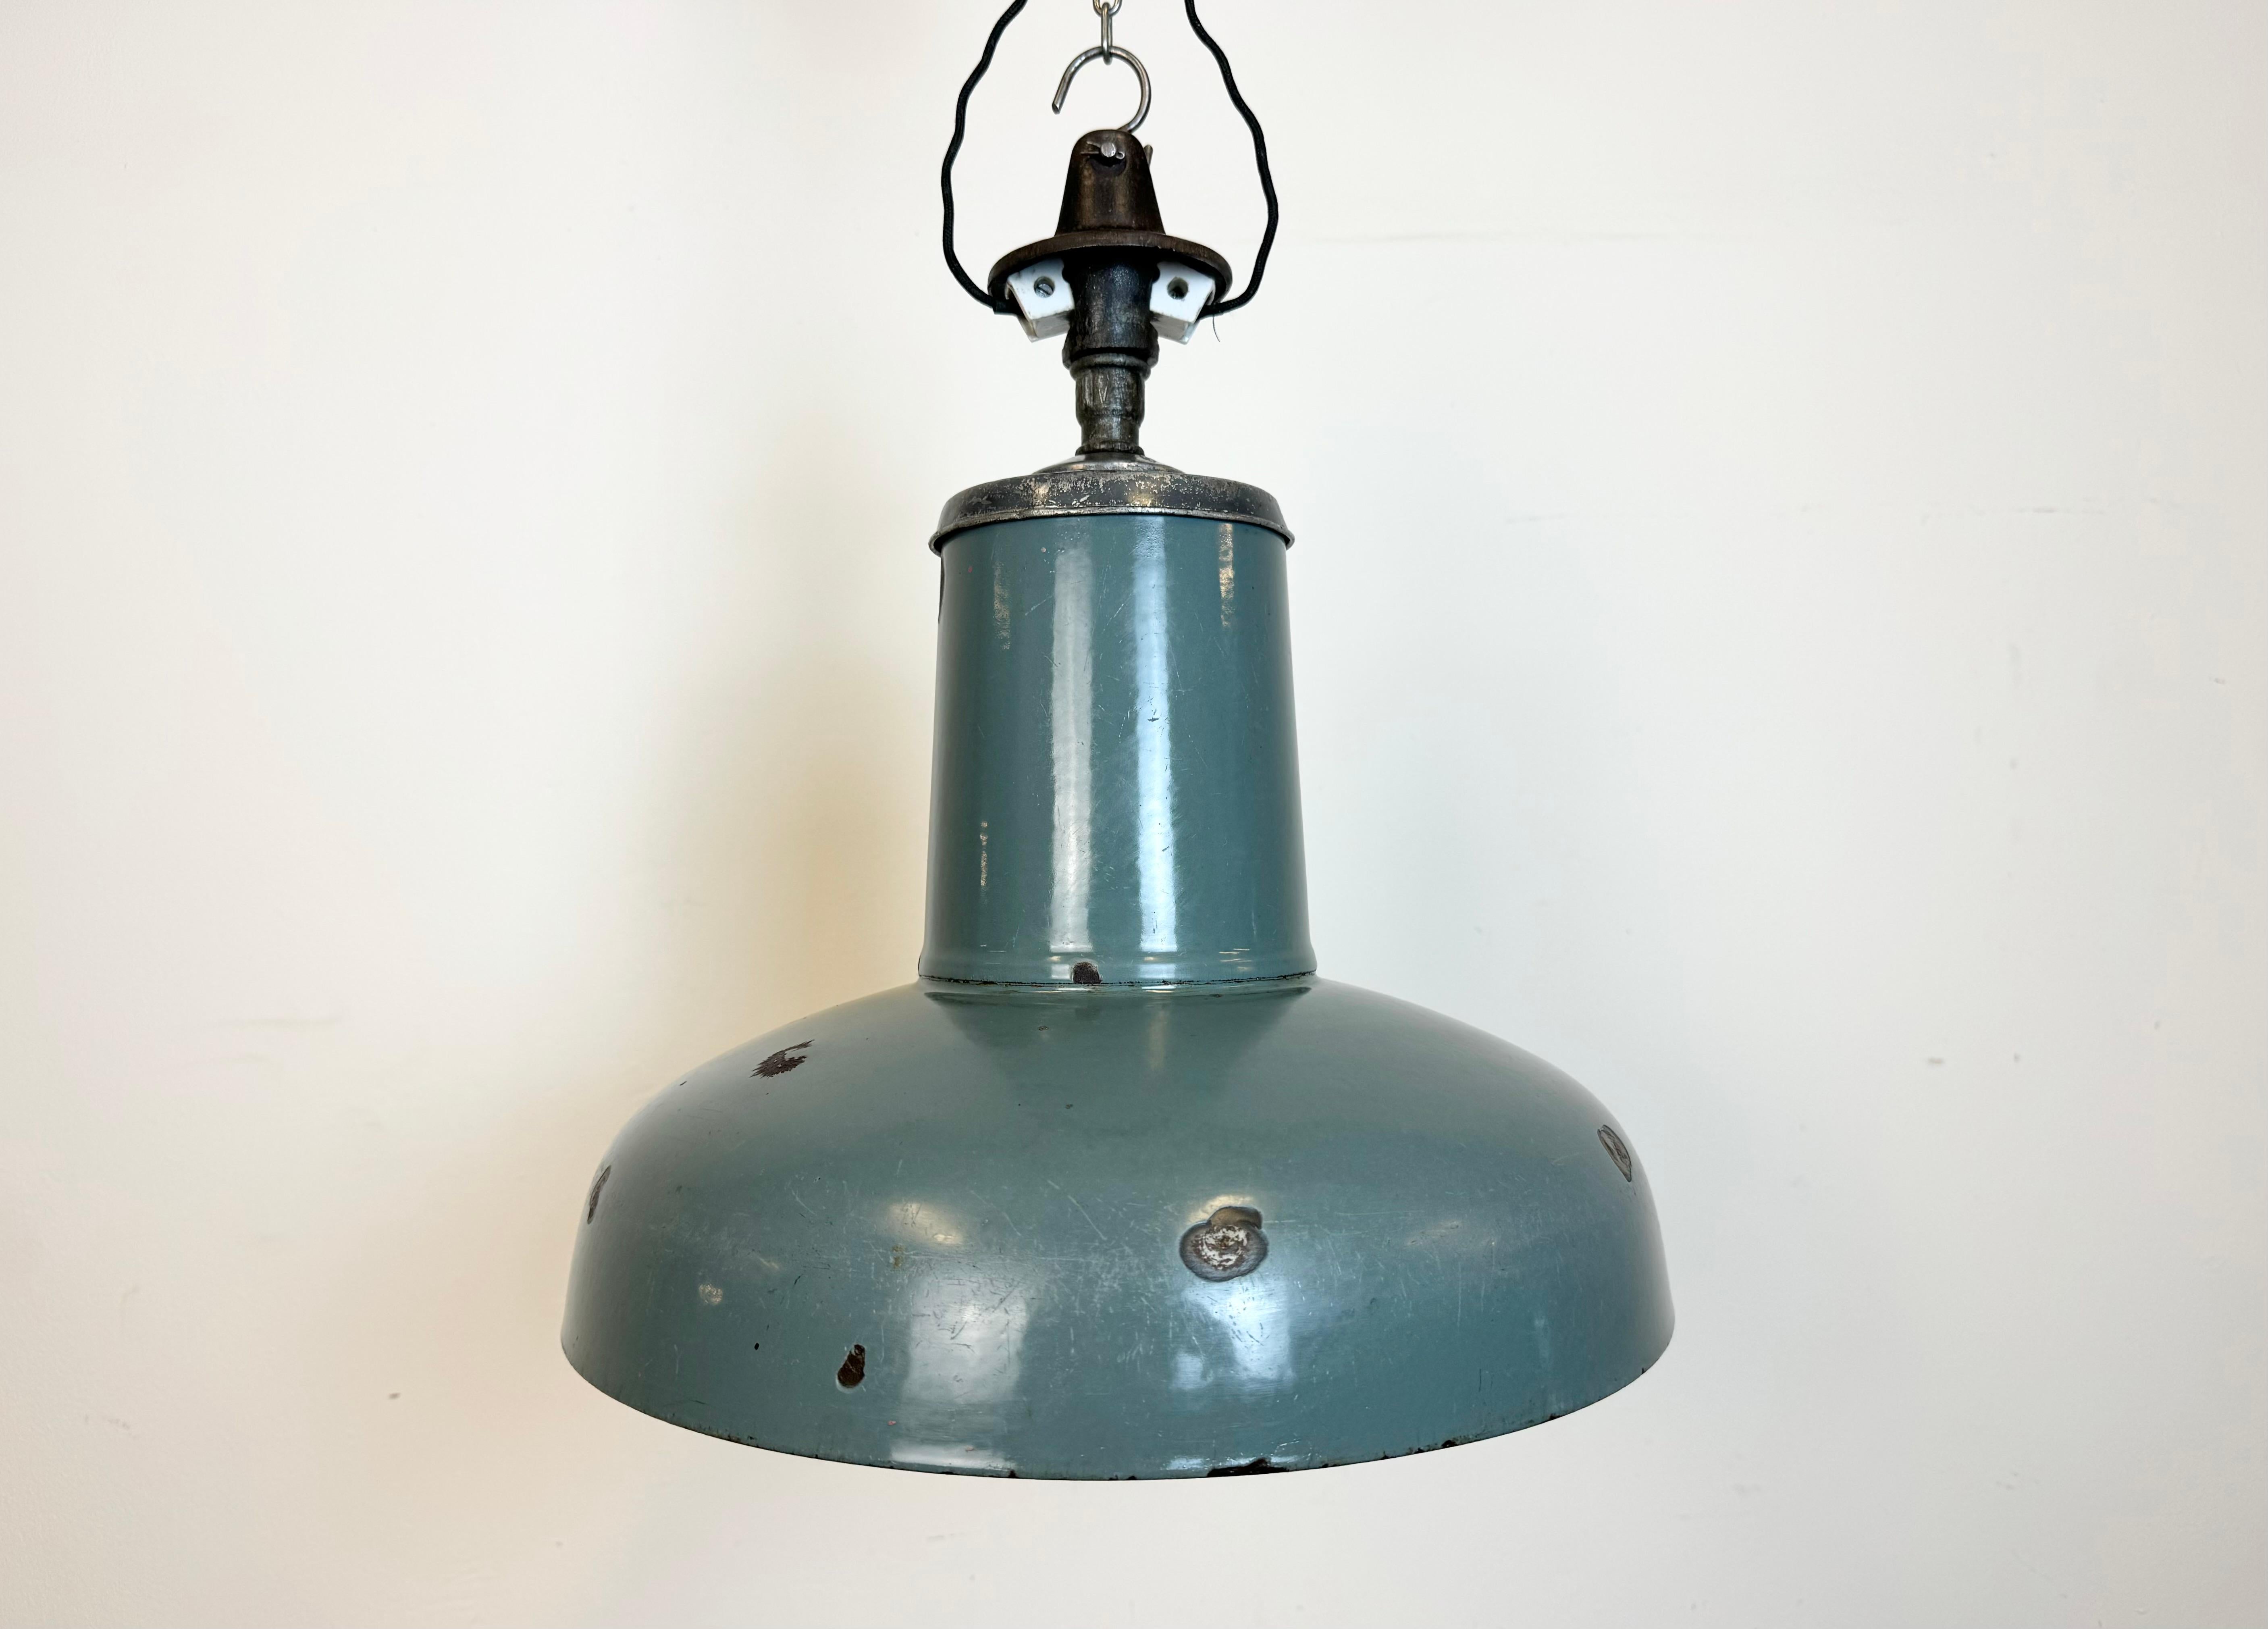 Industrial grey enamel pendant light made by Siemens in Germany during the 1930s. White enamel inside the shade. Cast iron top. The porcelain socket requires standard E 27/ E26 light bulbs. New wire. Fully functional. The weight of the lamp is 2,6